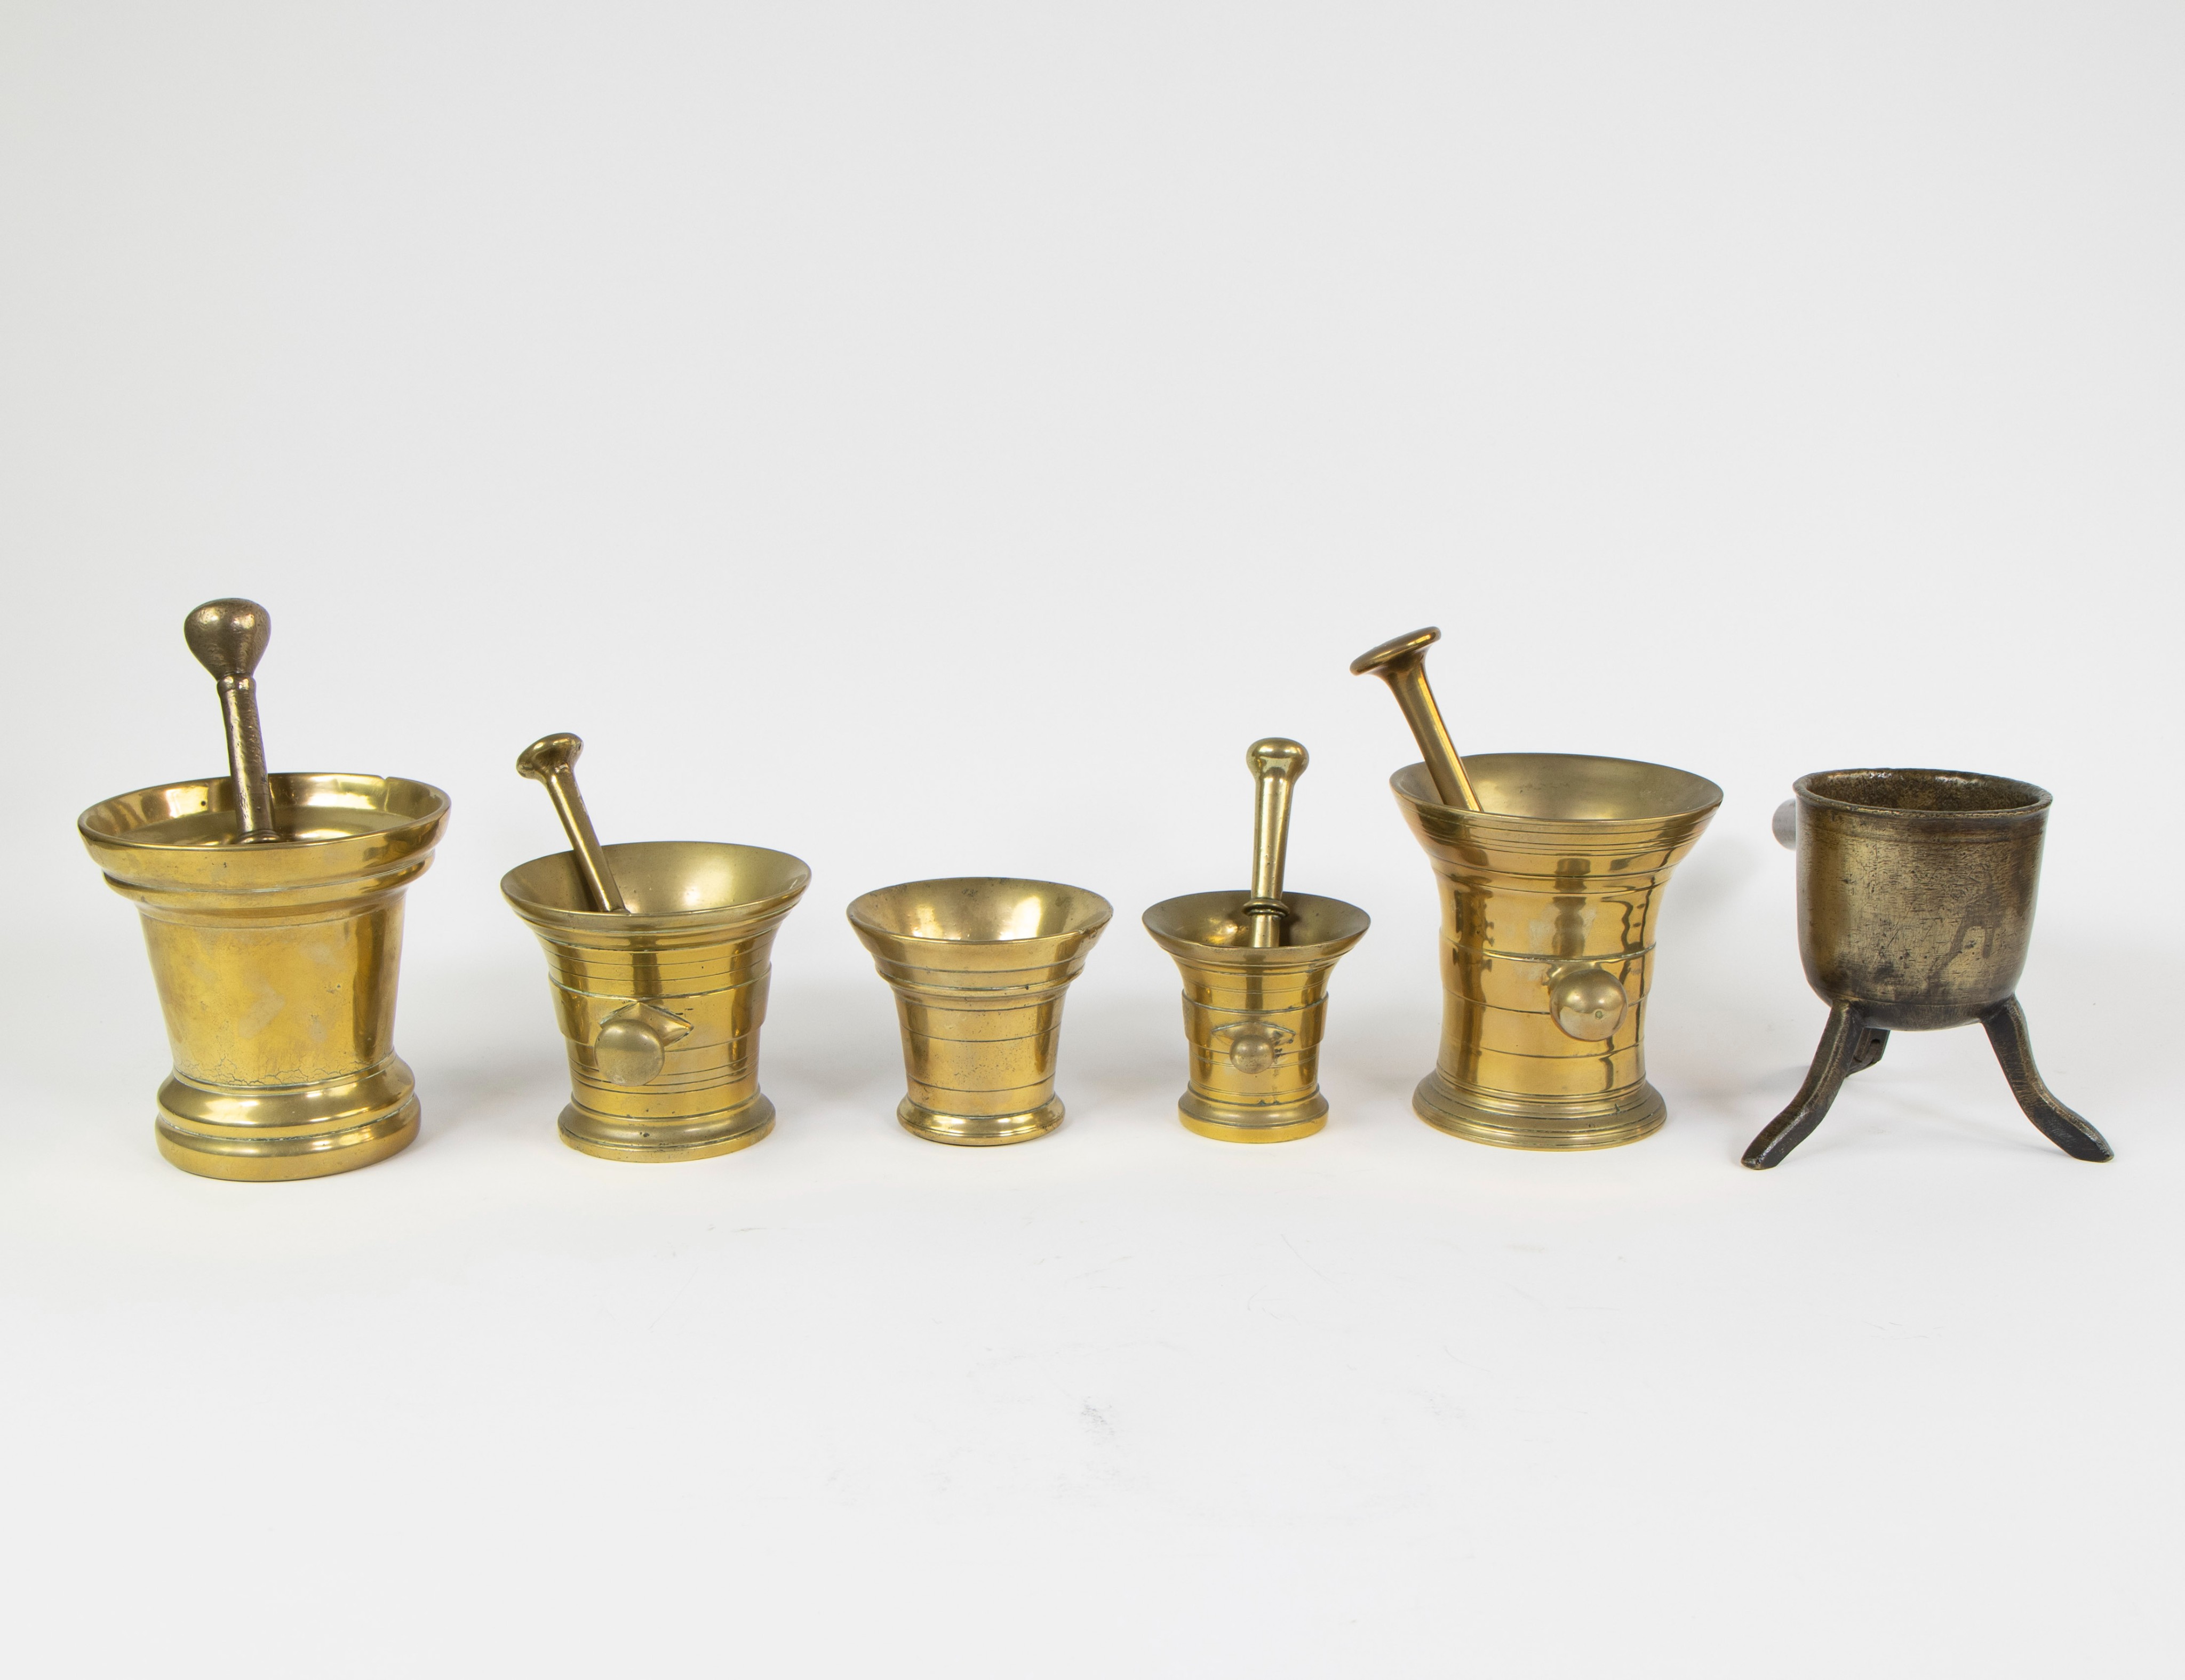 Collection of mortars, pestles and a melting pot - Image 4 of 6